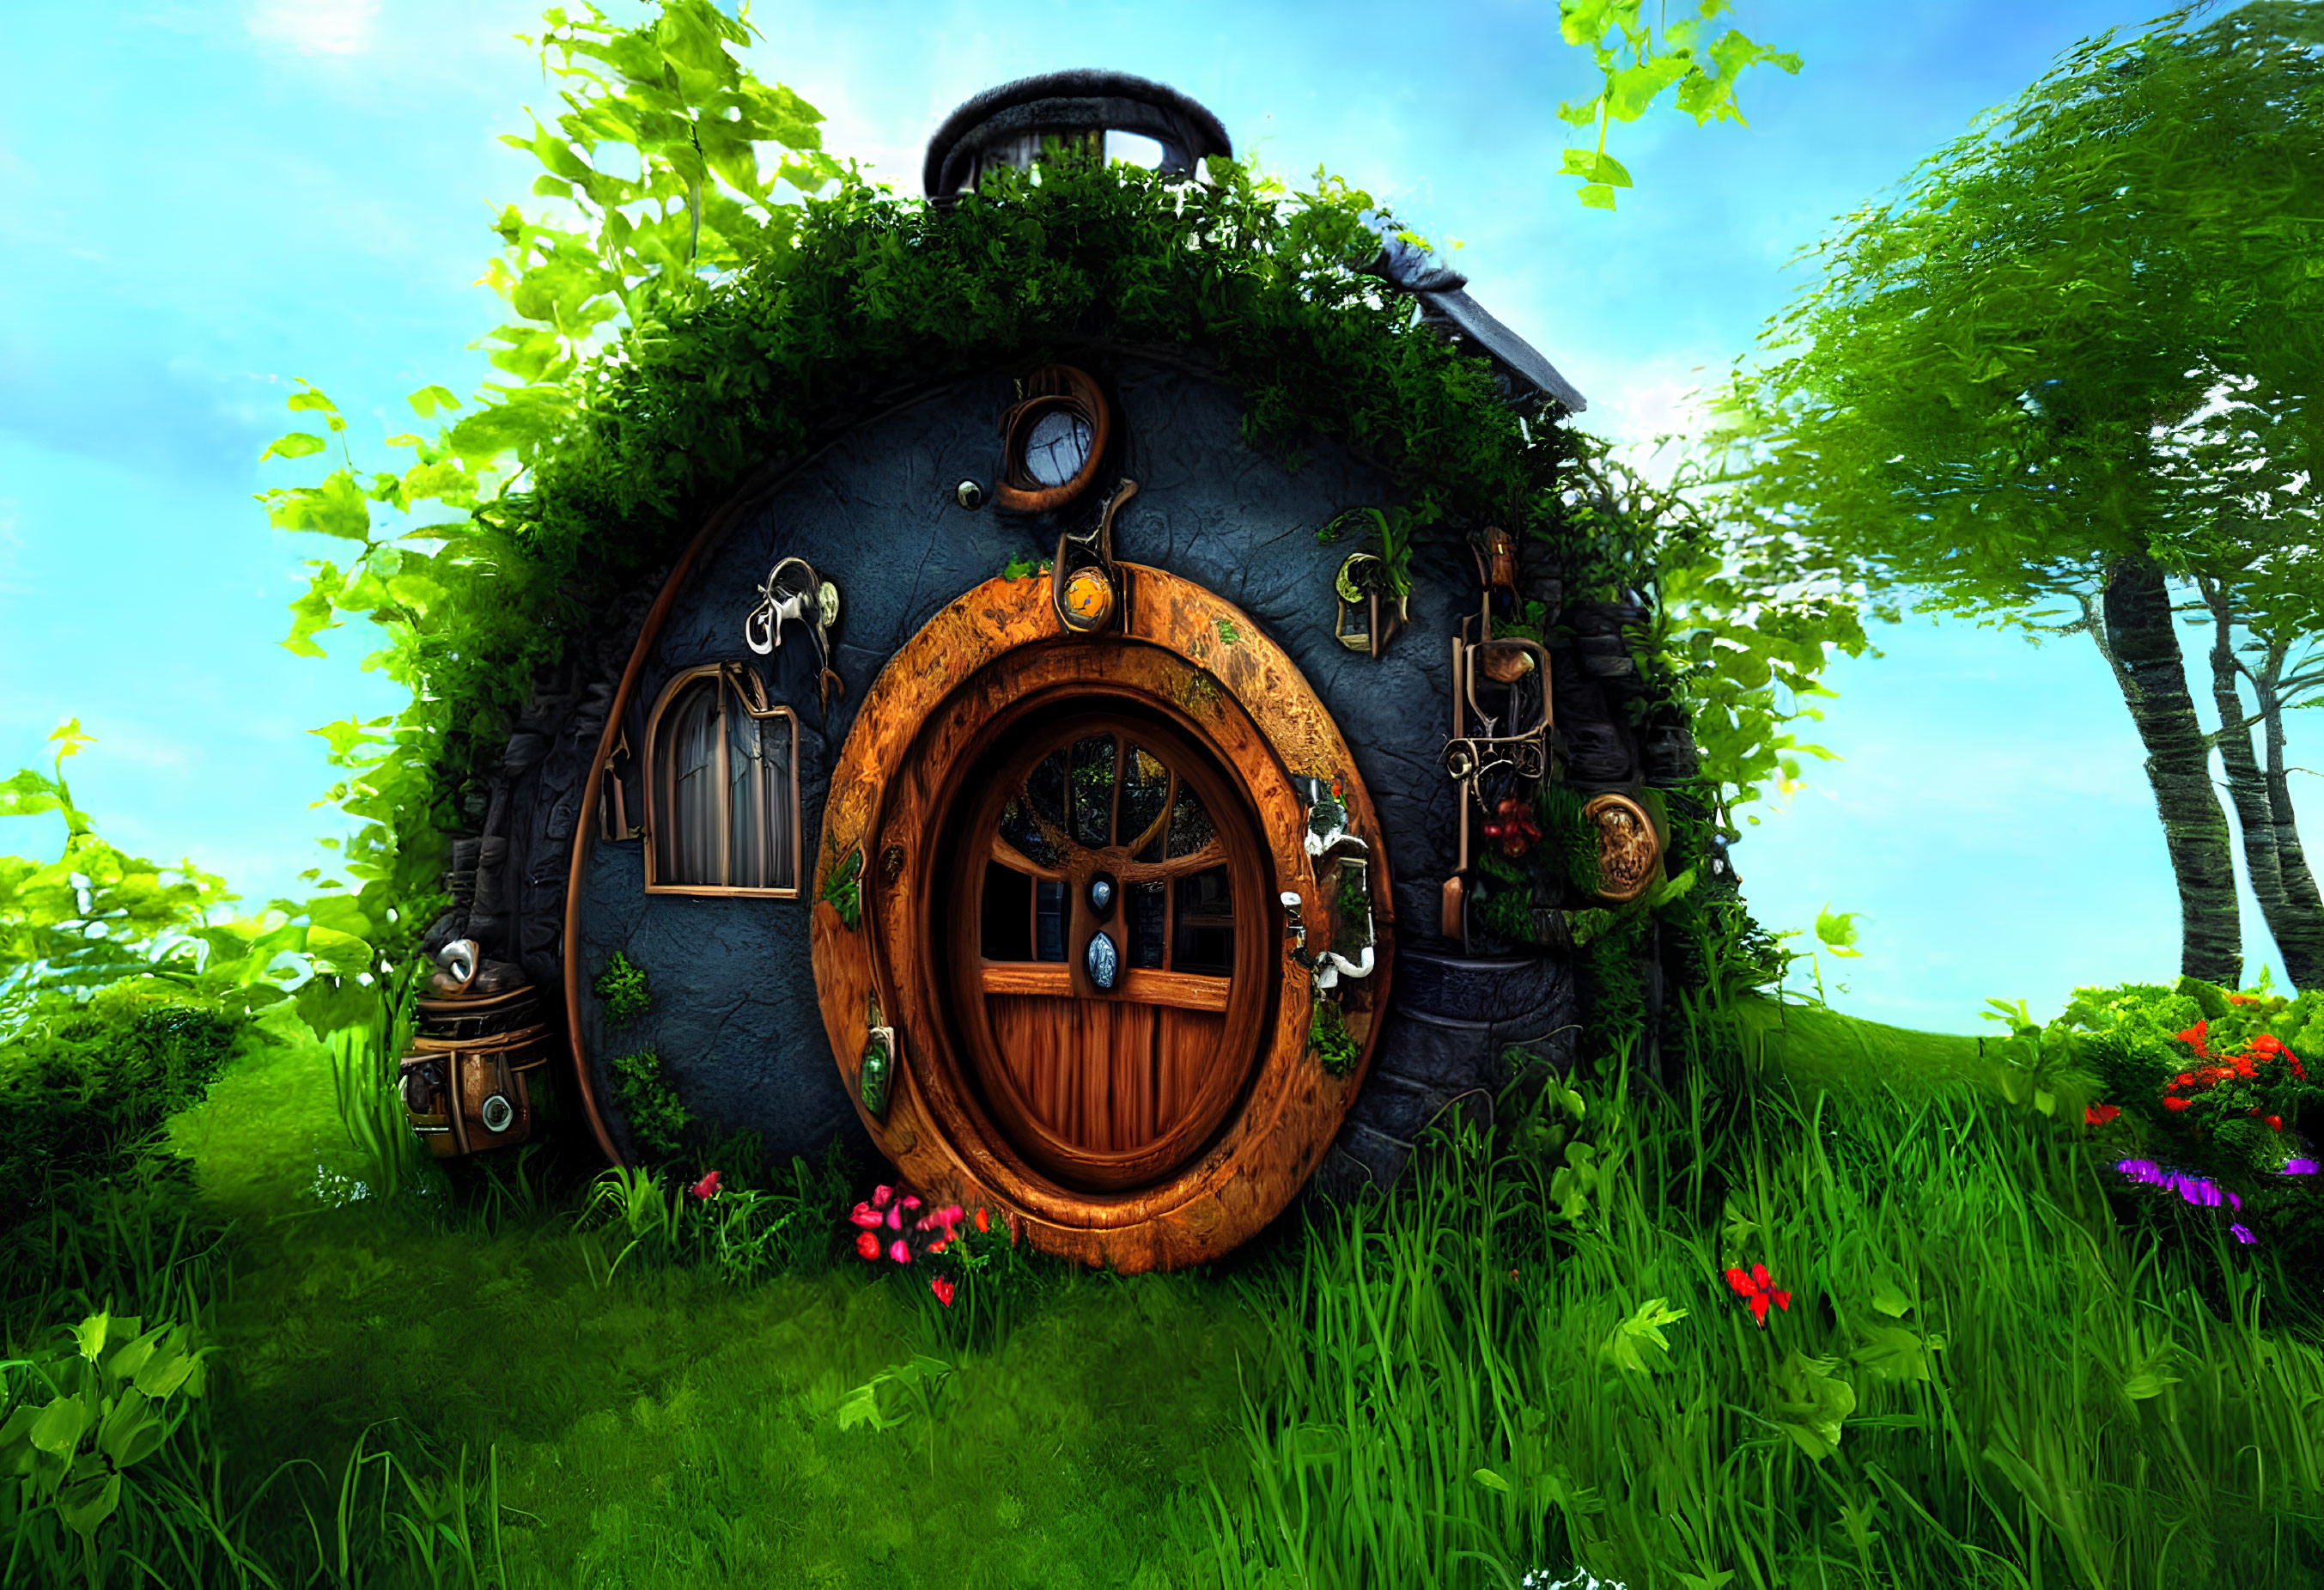 Whimsical round wooden door with intricate metalwork in lush green hillside